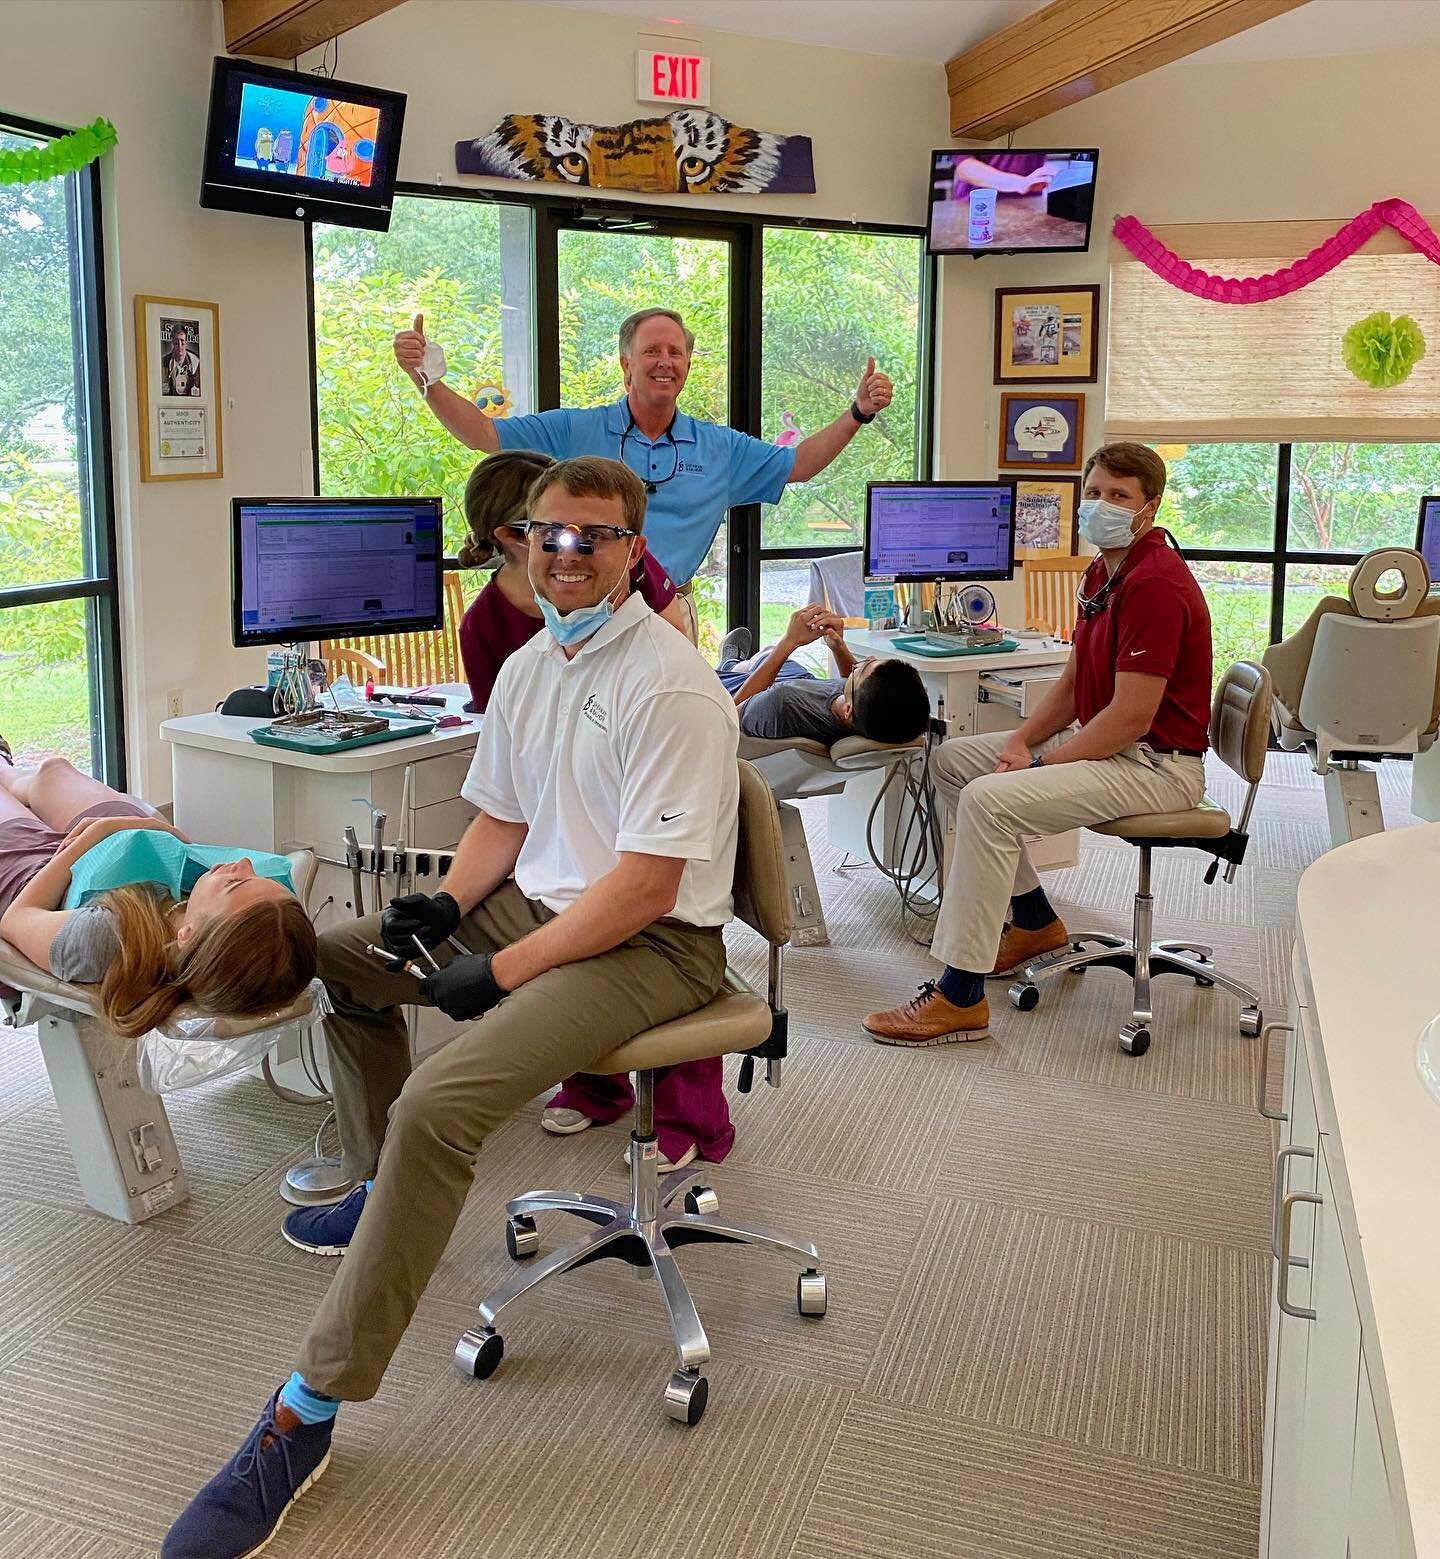 🚨Proud wife and momma moment 🚨When Mrs. Jane (@janesherman1957) walked in to see her husband and sons all working together today, she snapped this photo beaming with excitement. Our team has always been committed to providing the best care possible